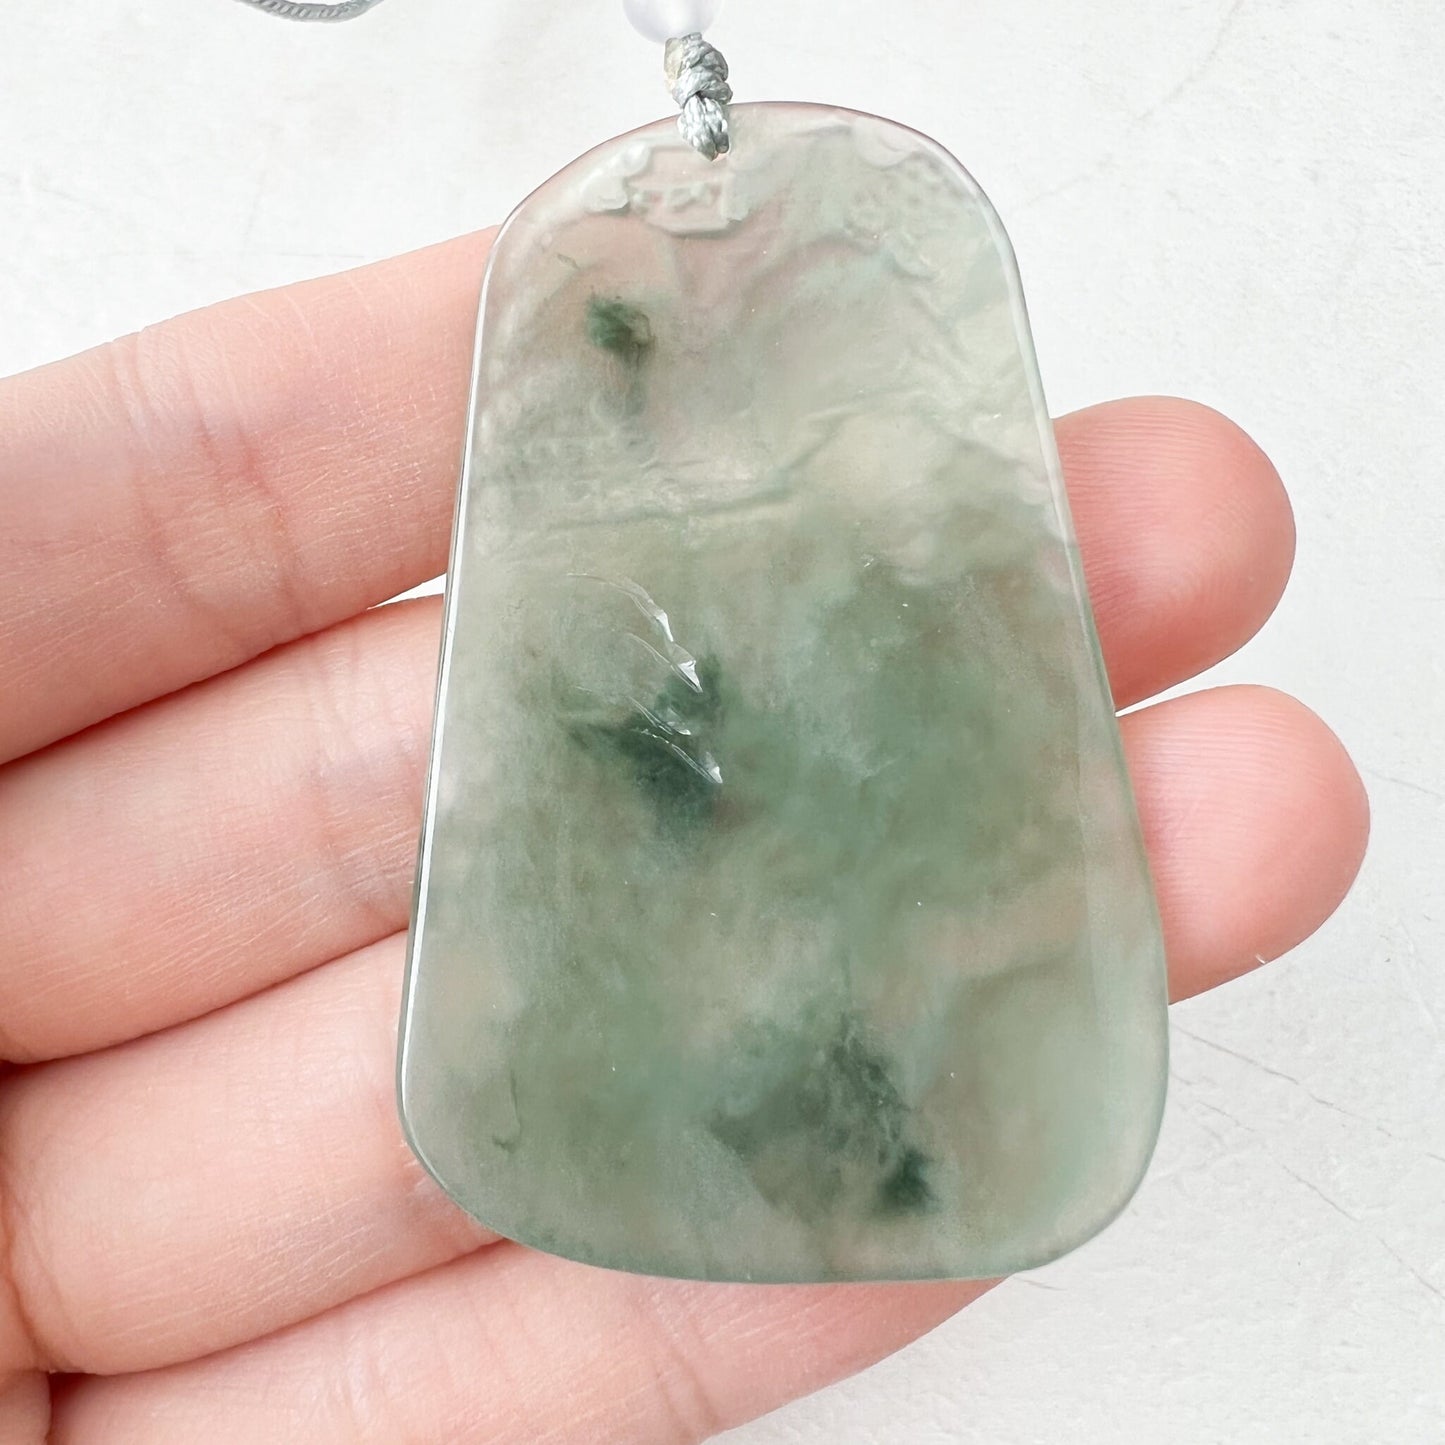 Icy Translucent Jadeite Jade Thin Landscape Mountain Forest River Scenery Hand Carved Pendant Necklace, ZYF-1221-1646196175 - AriaDesignCollection